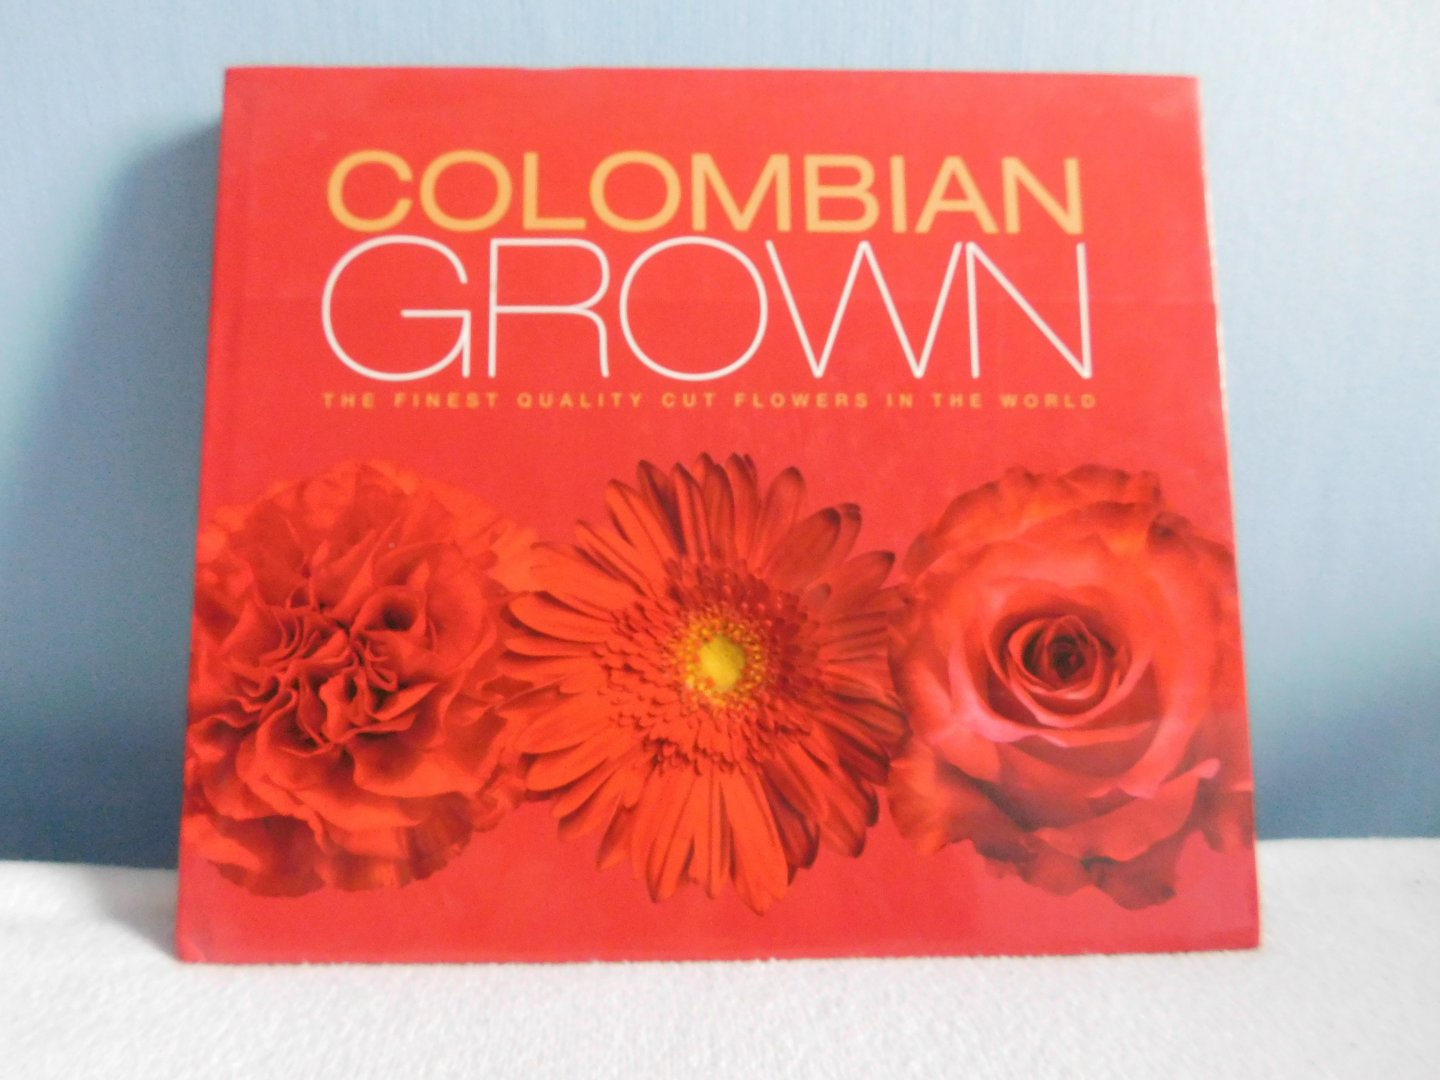 Ministry of Agriculture - Colombian Grown the Finest Quality Cut Flowers in the World